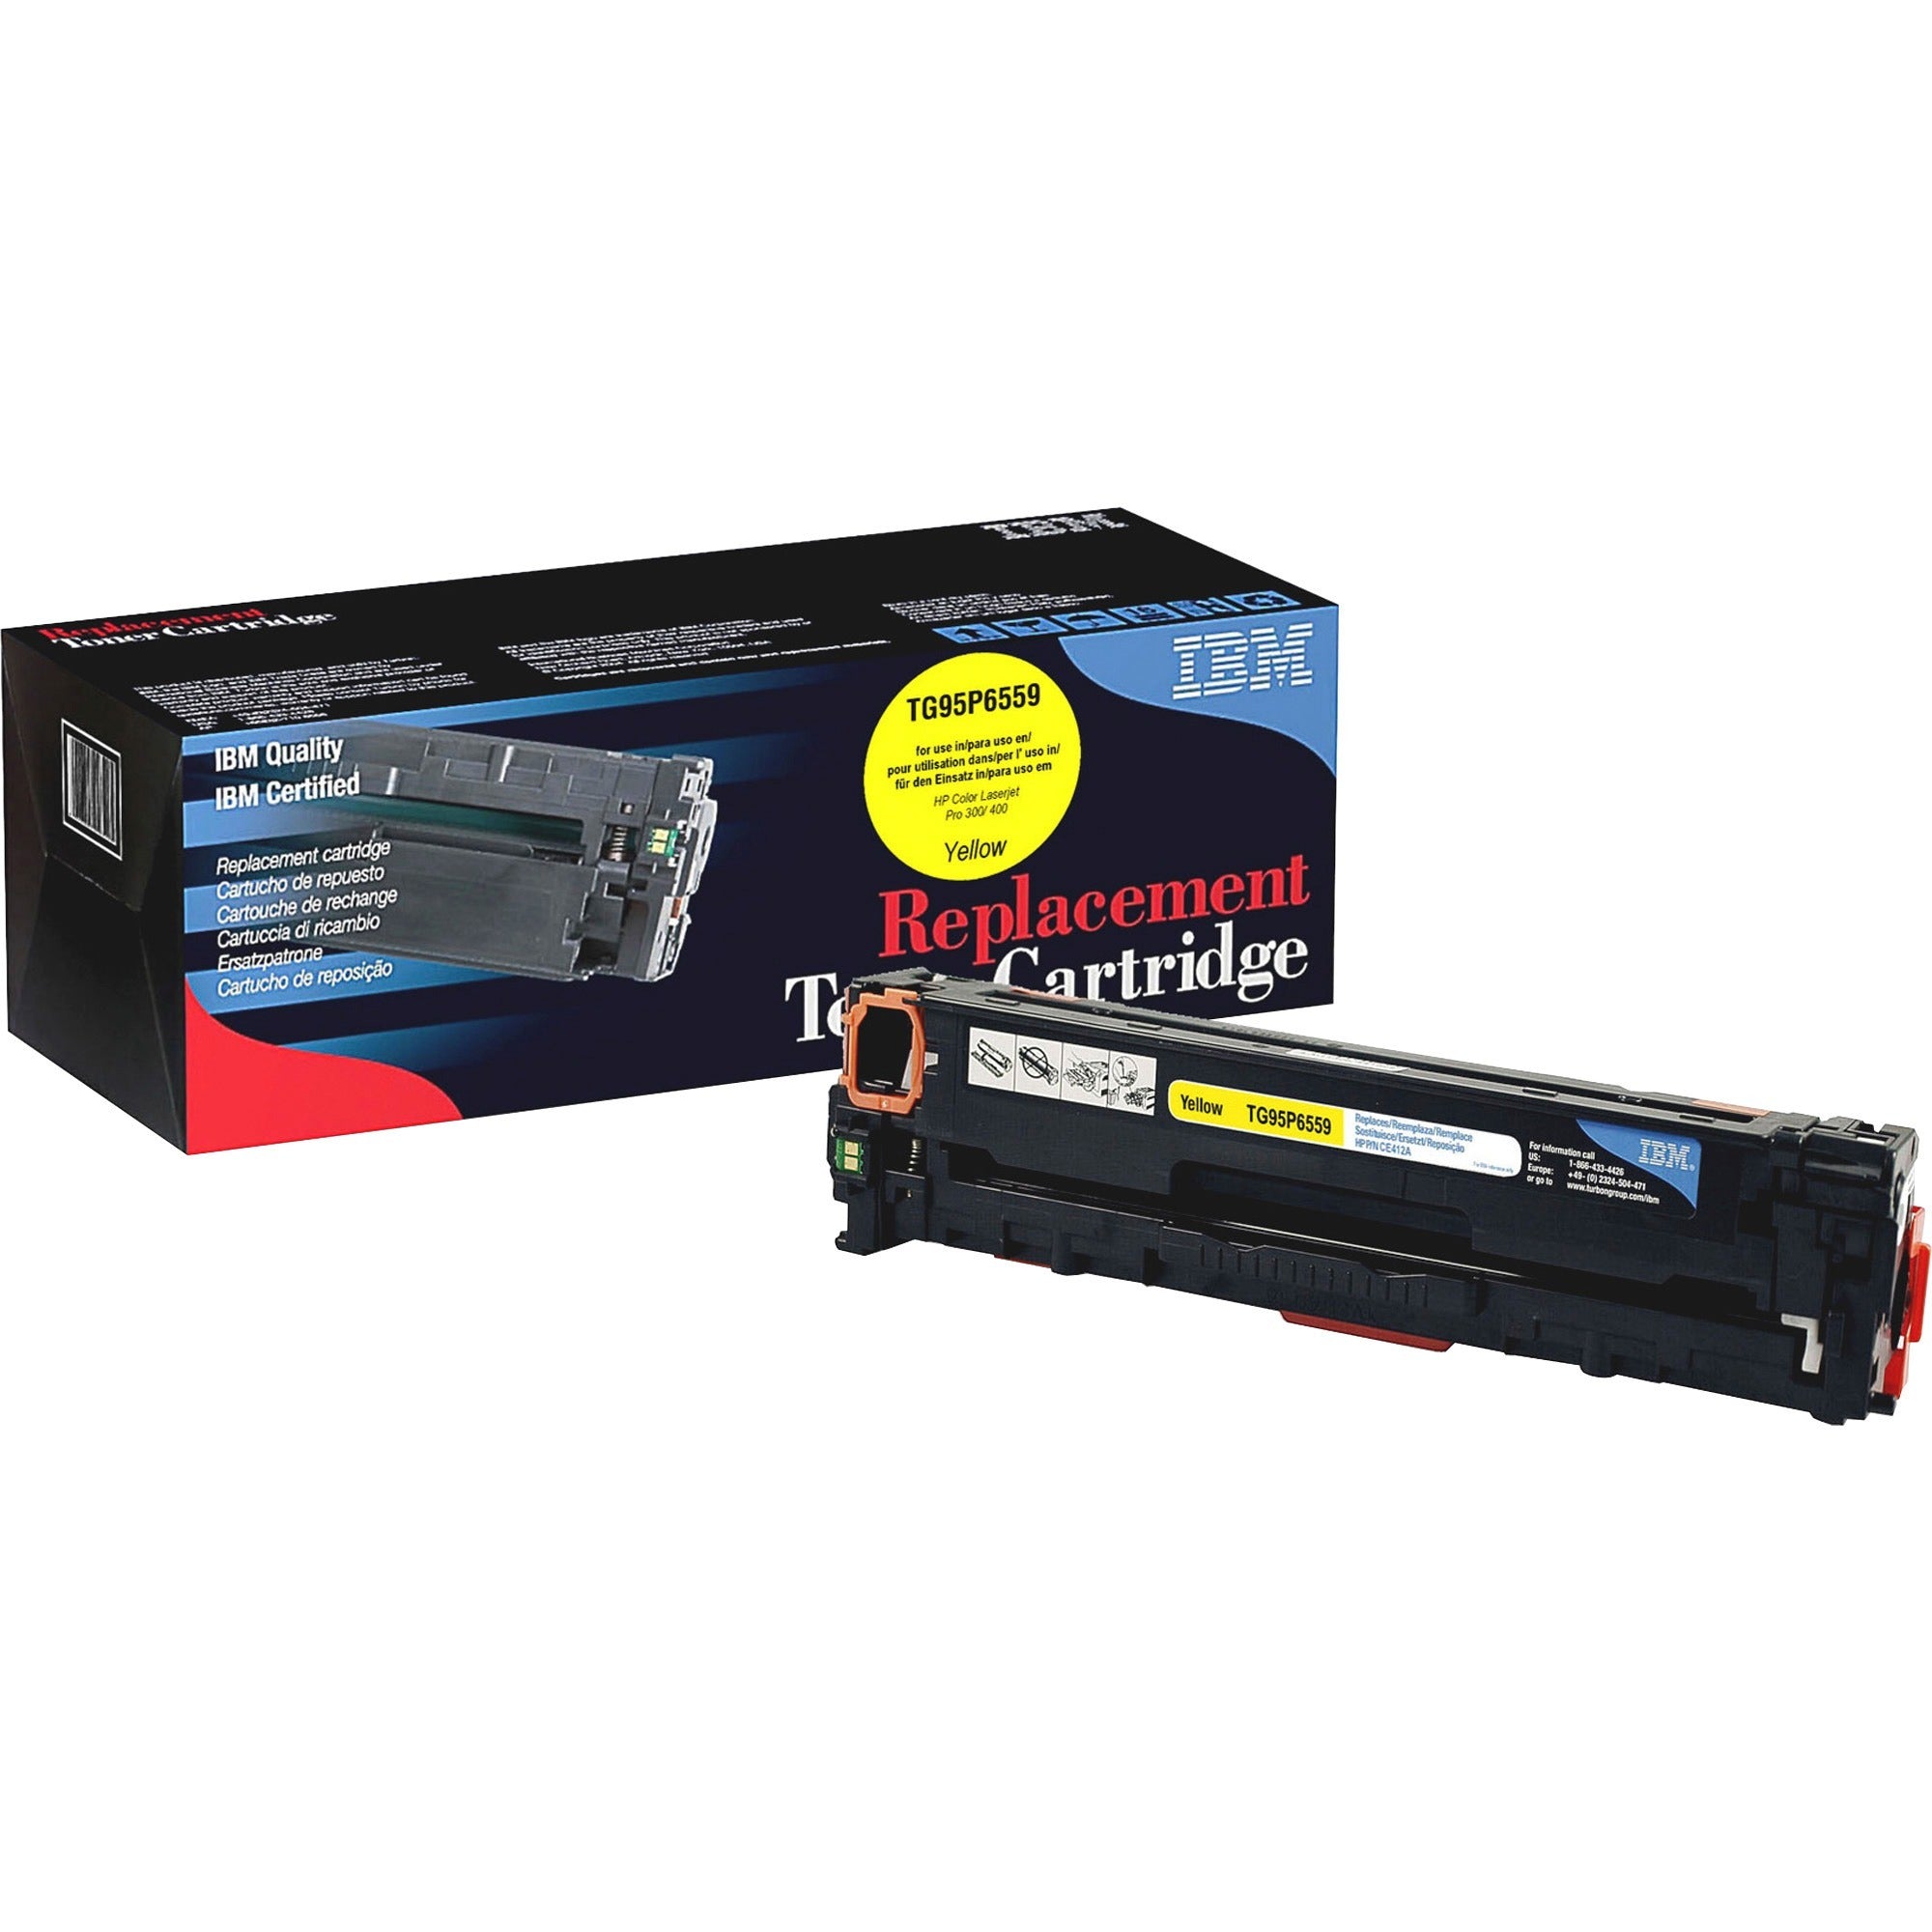 IBM Remanufactured Laser Toner Cartridge - Alternative for HP 305A (CE412A) - Yellow - 1 Each - 2600 Pages - 